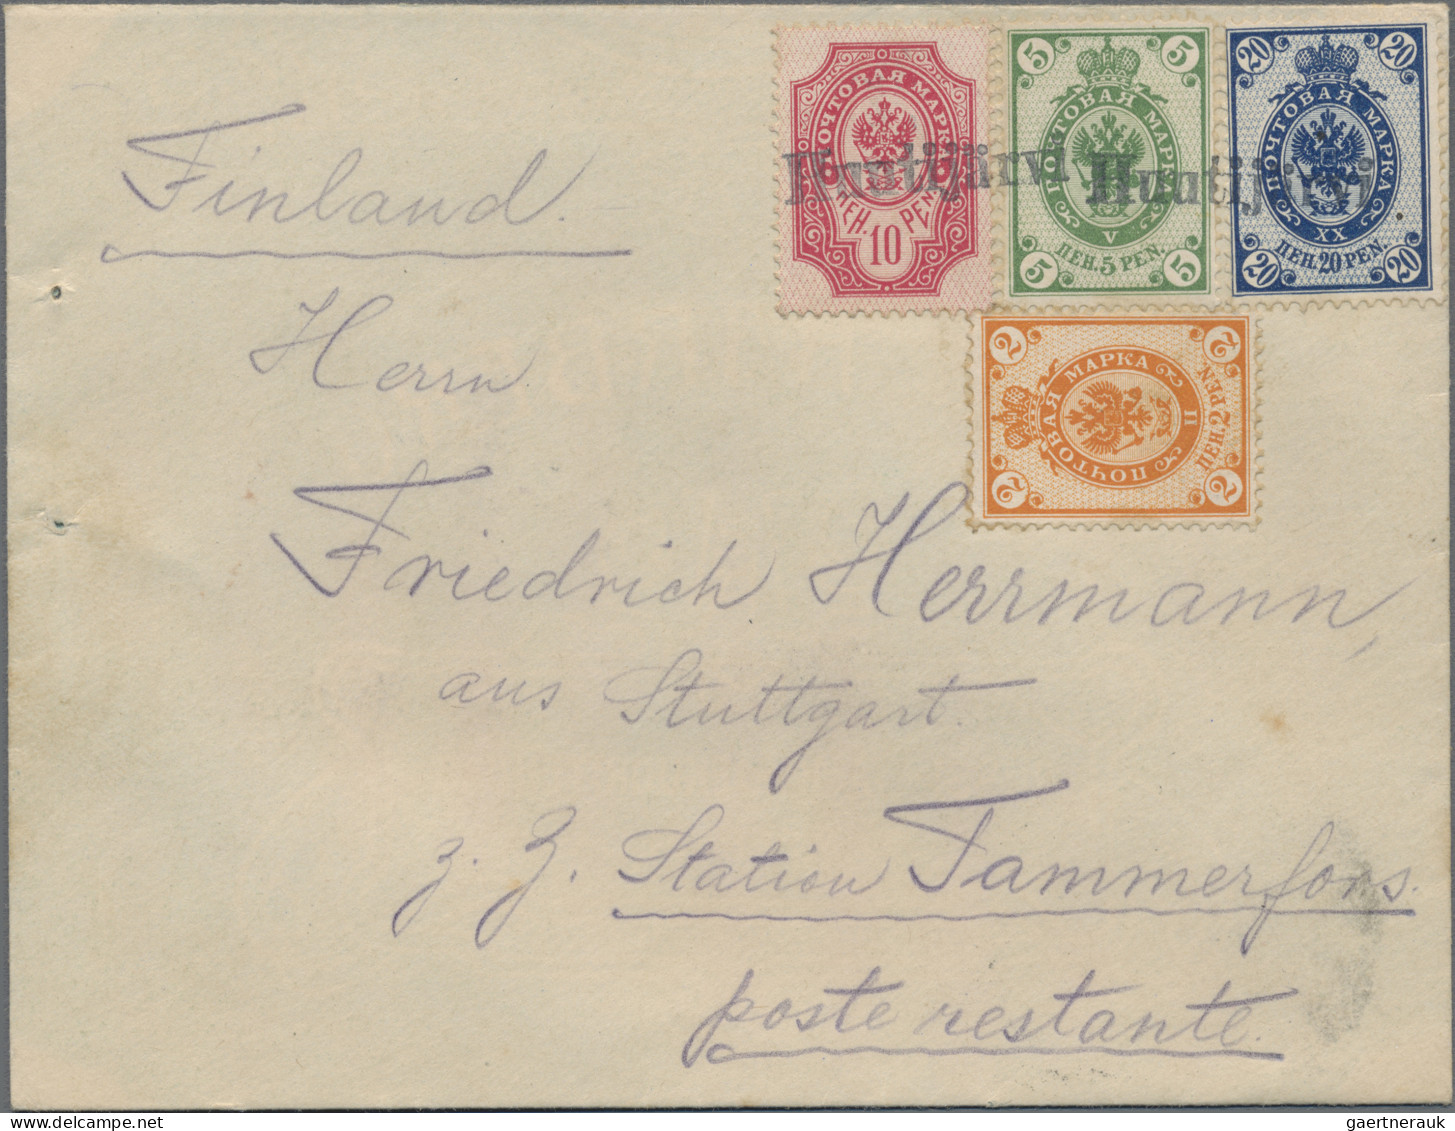 Finland: 1906 Cover From Huutijärvi To A German Currently At Tammerfors Station - Covers & Documents